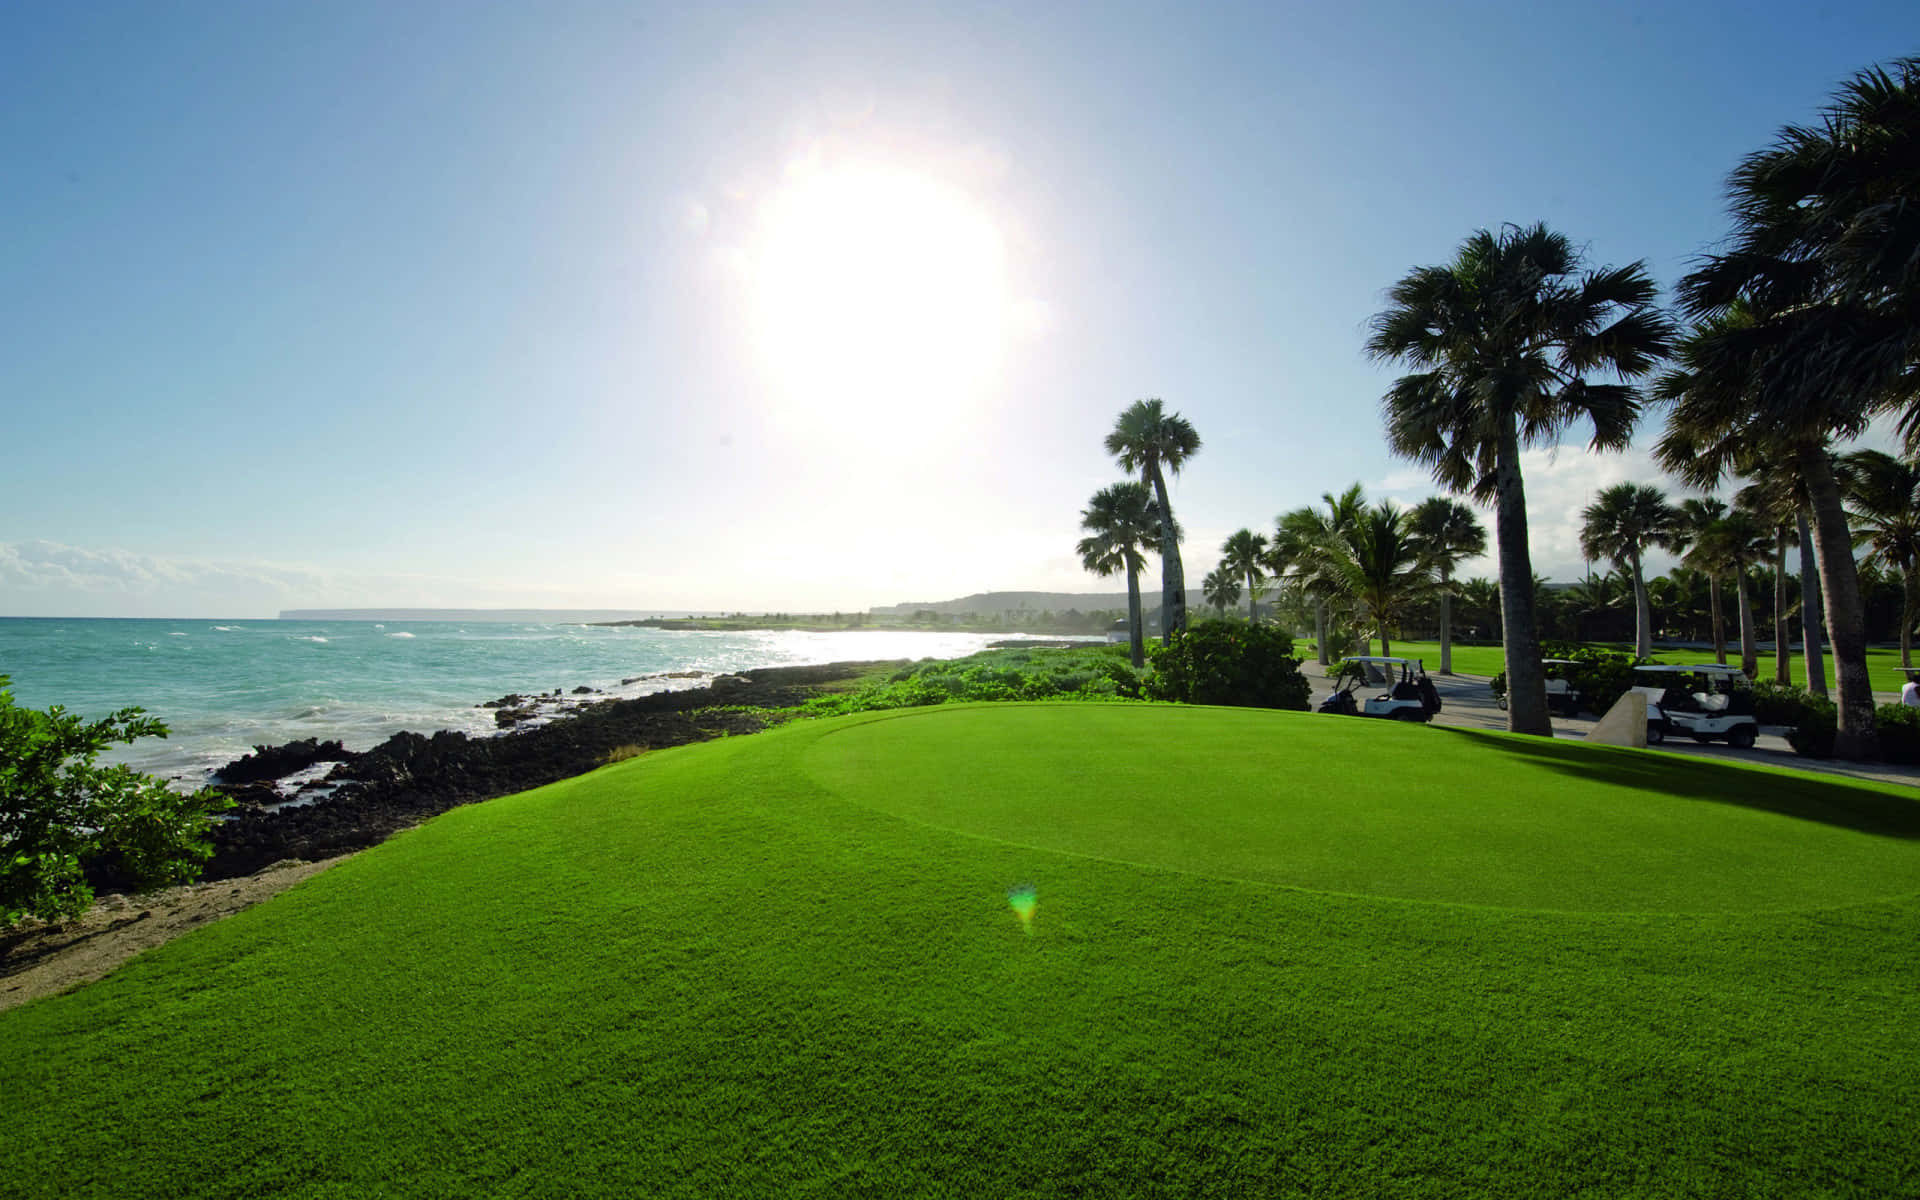 Enjoy Florida's tropical climate while playing golf at one of its many courses! Wallpaper